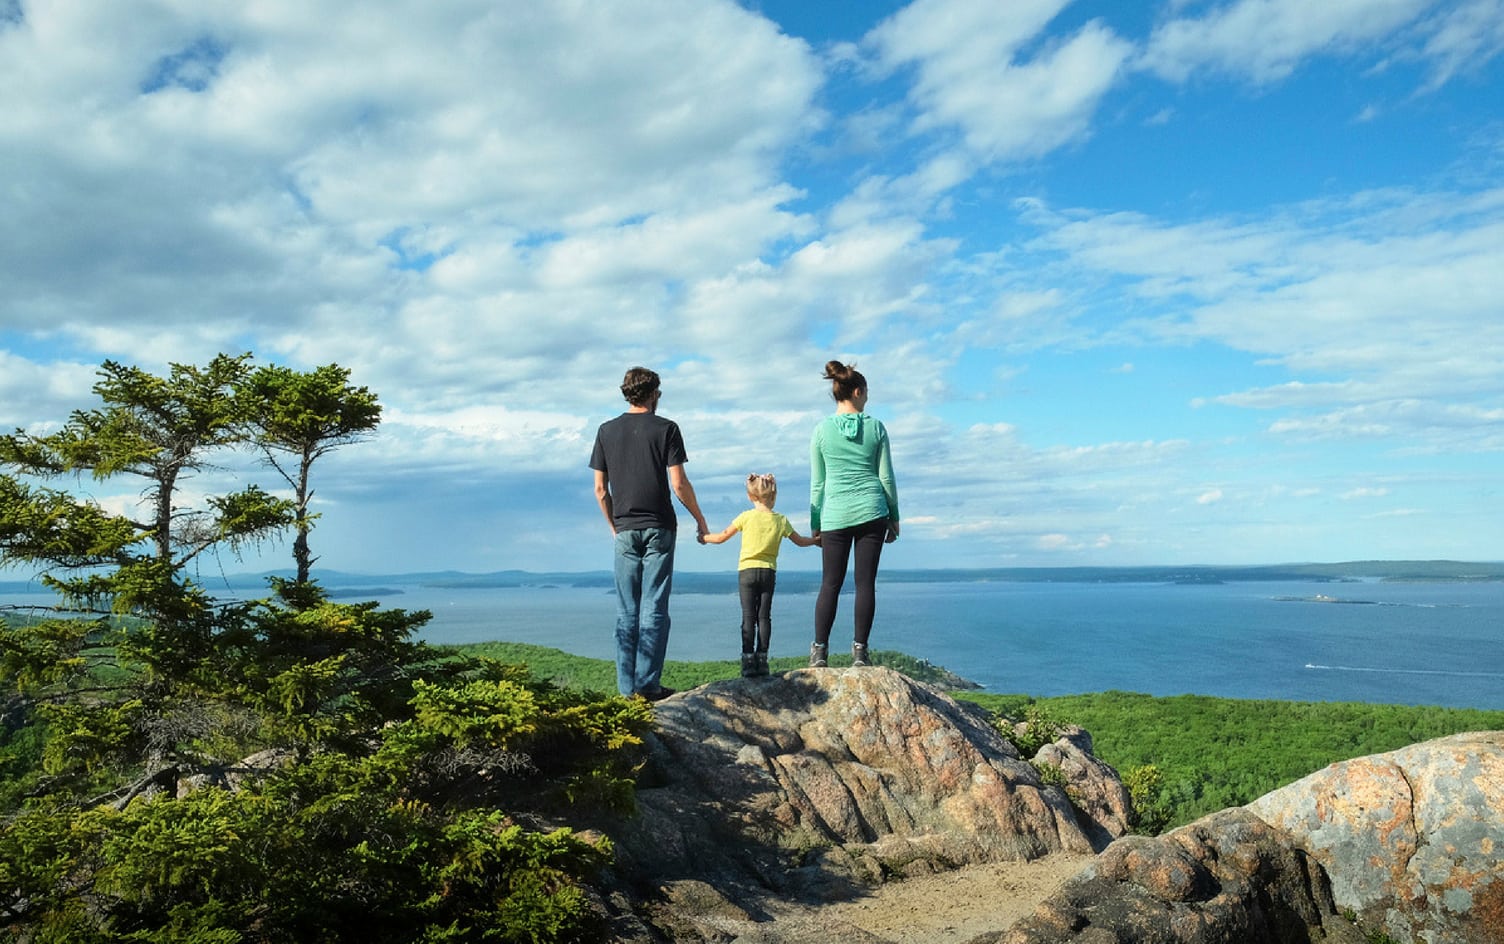 ACADIA NATIONAL PARK, MAINE Top 10 Family-Friendly Hikes in the U.S. Parks